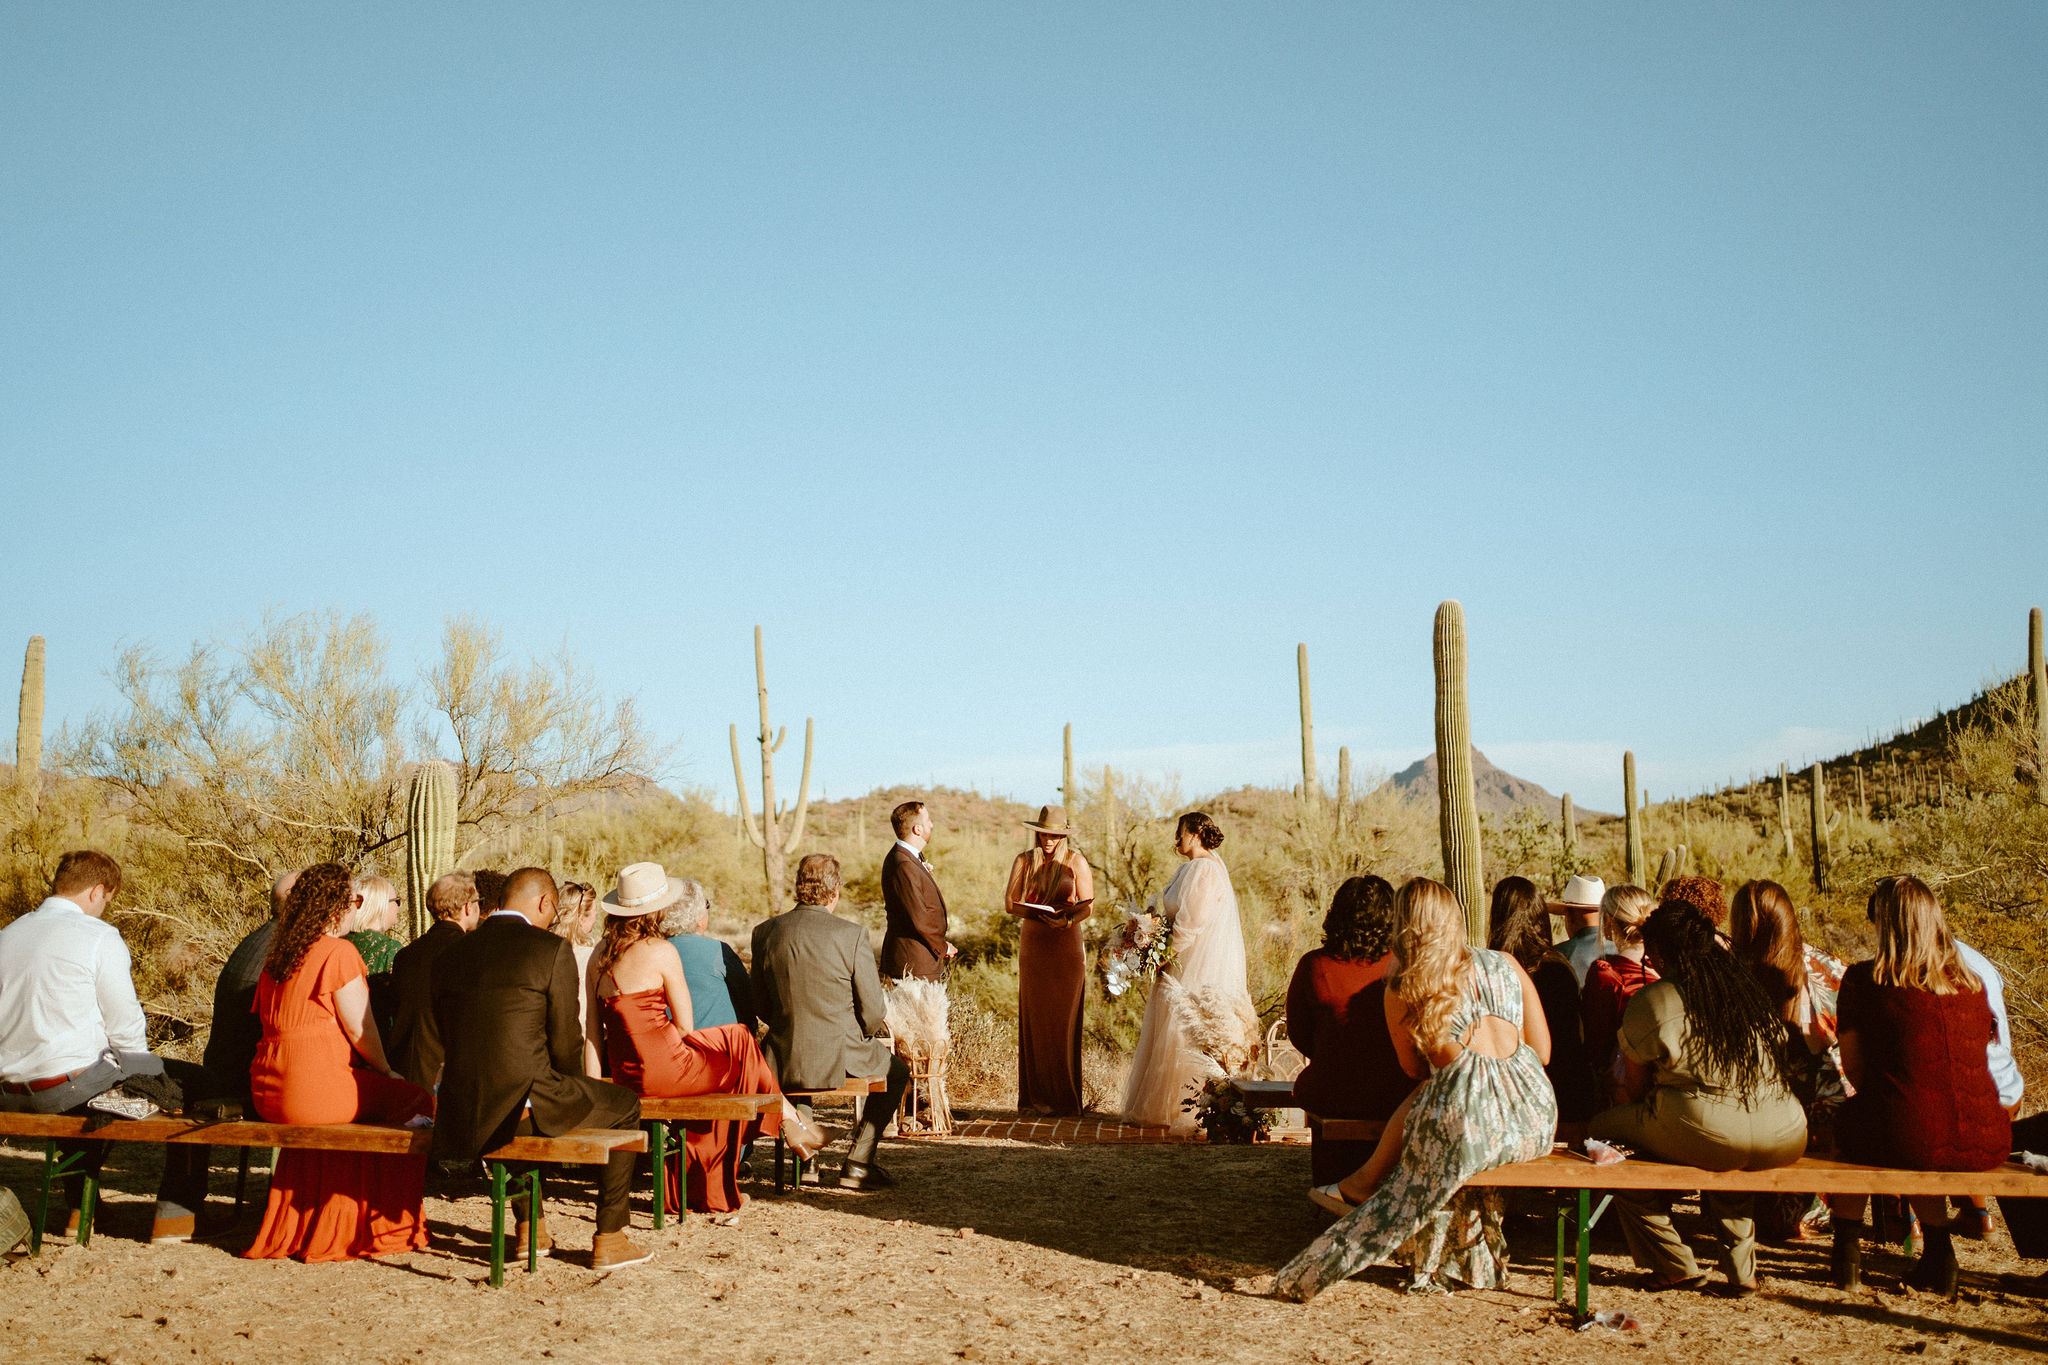 Friends and family gather at saguaro national park to watch the bride and groom get married